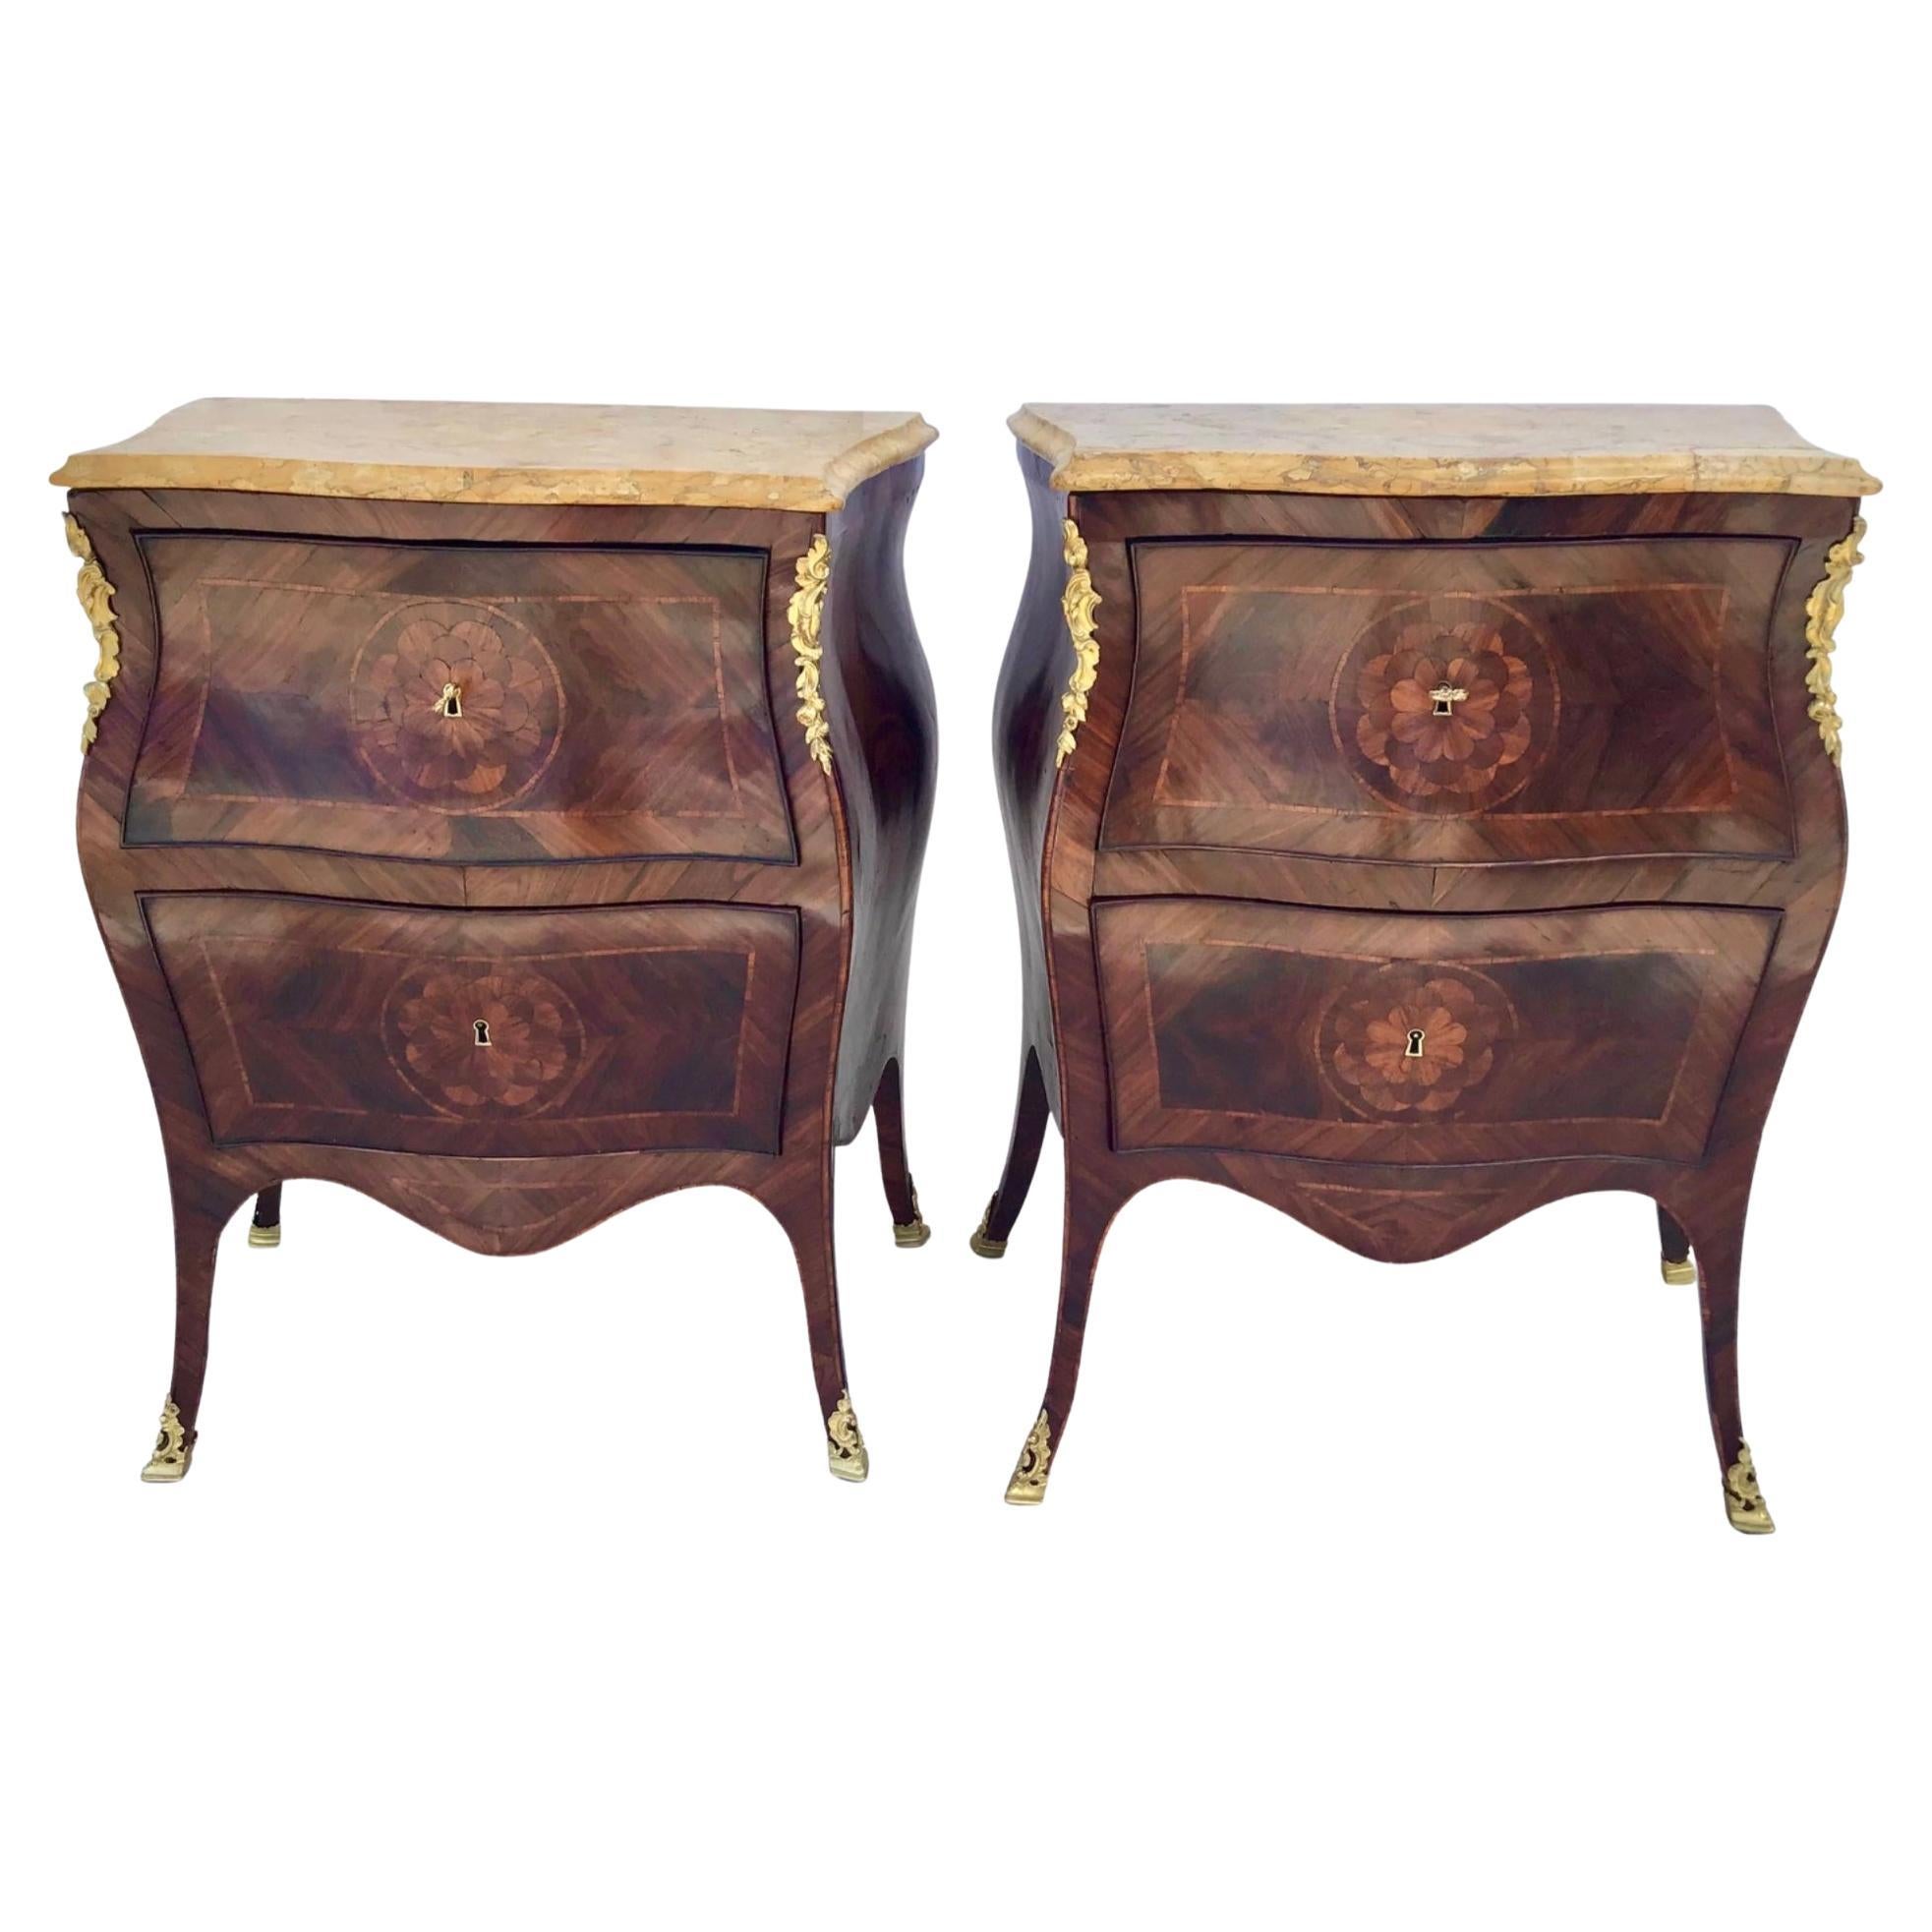 Pair of 18th century Italian Rococo gilt bronze-mounted walnut and fruitwood inlaid bedside Comodini commodes bedside chest of drawers / side tables. Very elegant work, with original Sienna marble tops. Neapolitan 
This rare pair would serve as